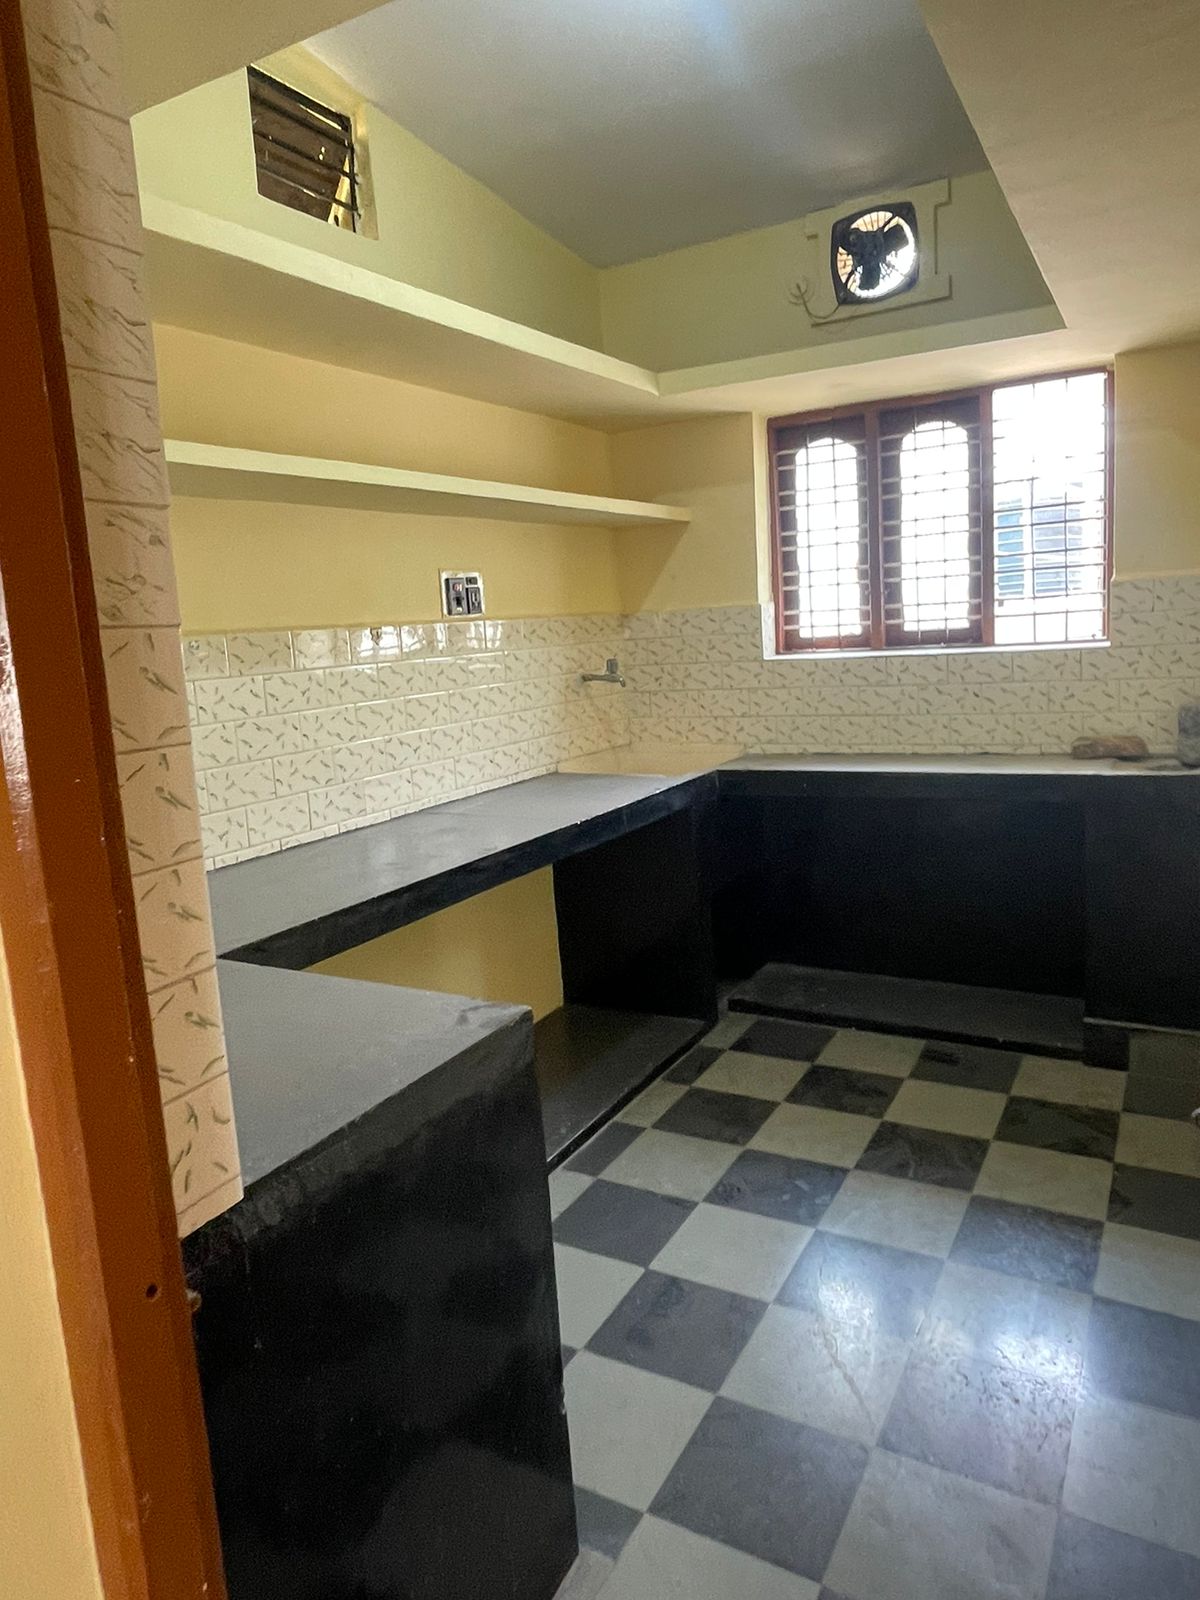 1 BHK Independent House for Lease Only at JAML2 - 4359 in Dodda Banaswadi